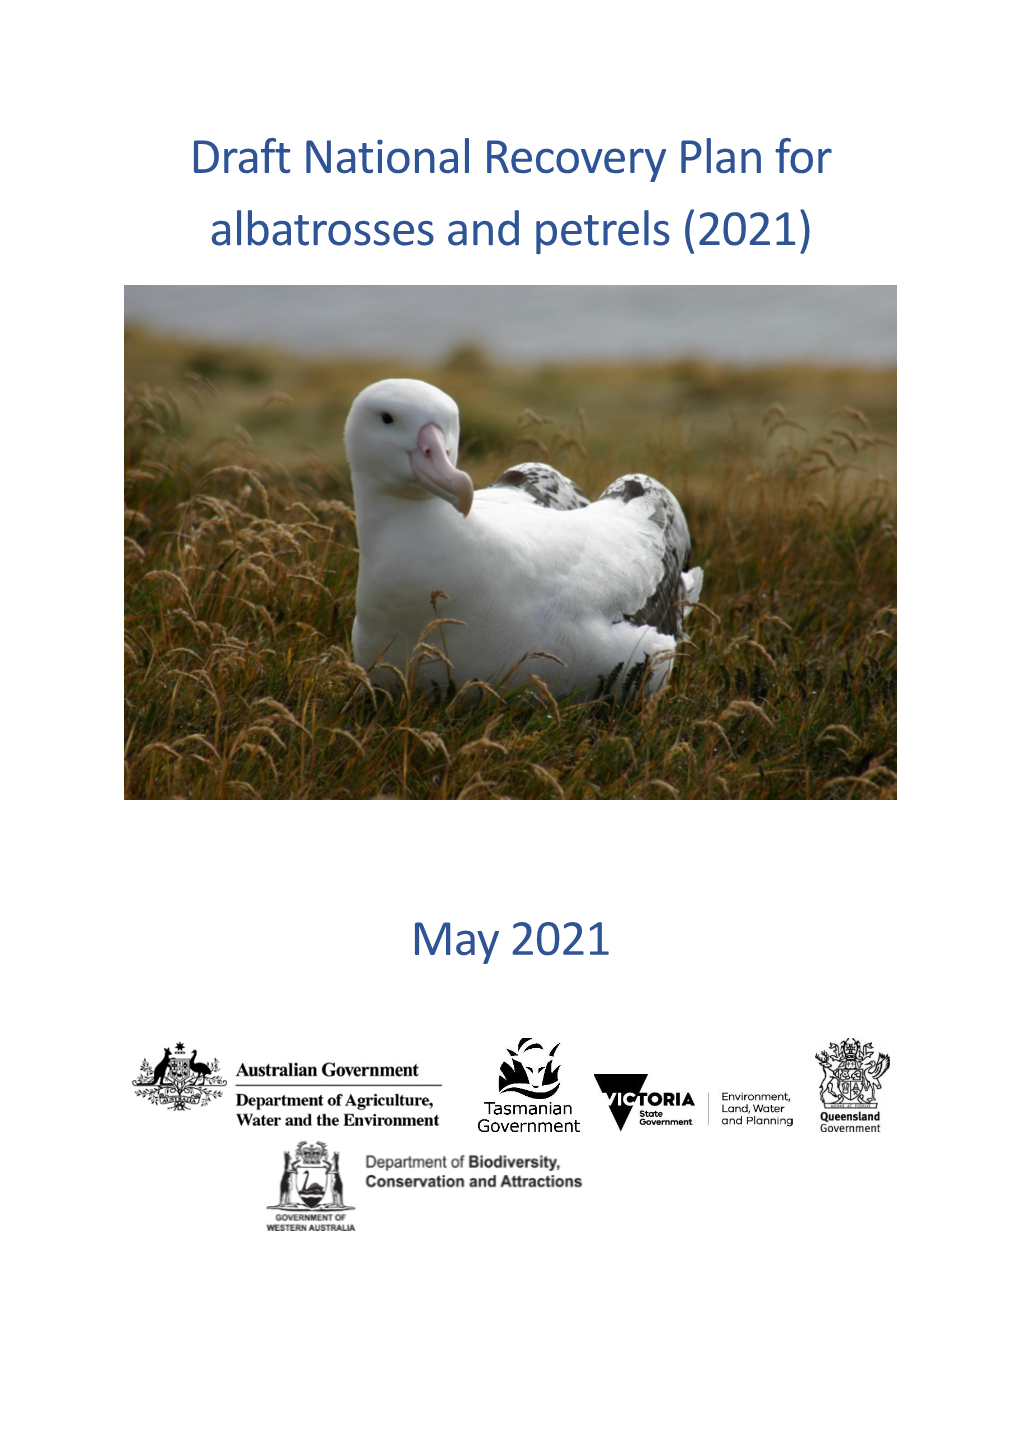 Draft National Recovery Plan for Albatrosses and Petrels (2021)